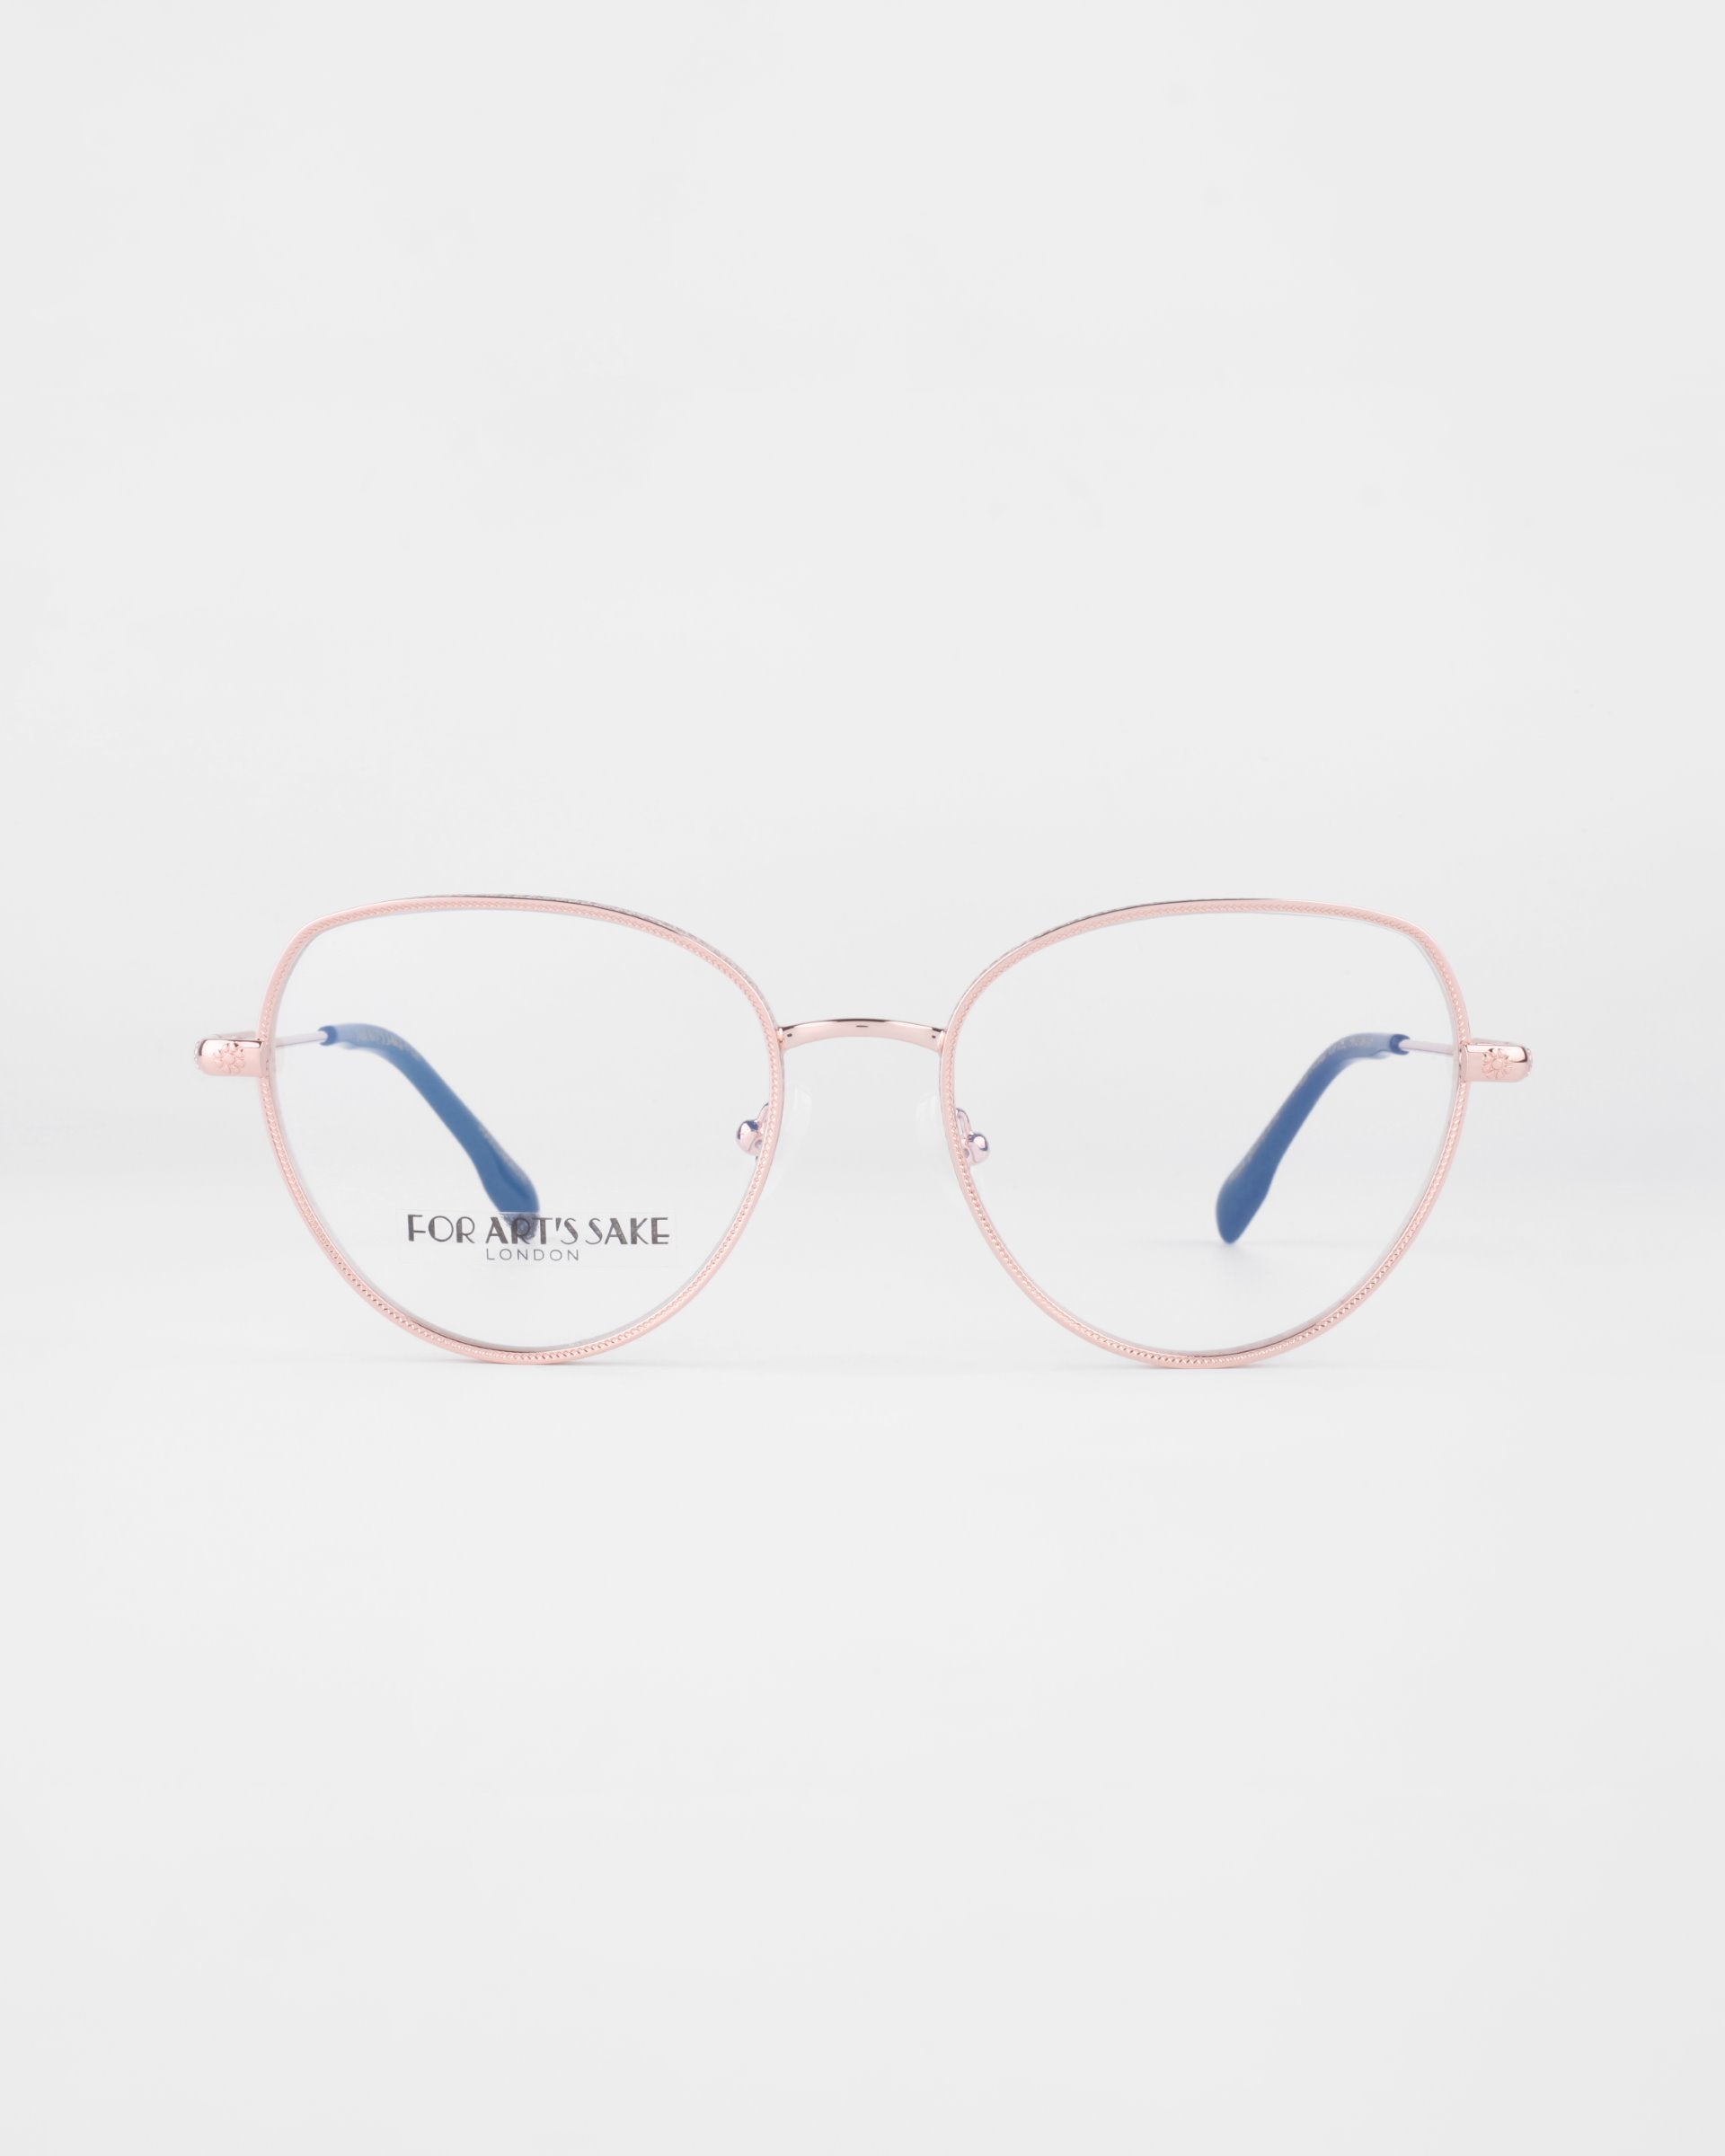 A pair of Frida Floral eyeglasses from For Art's Sake® with pink metal frames and round lenses on a plain white background. The earpieces are slender and slightly curved. Featuring 18-karat gold-plated frames, the words "FOR ART'S SAKE" are visible on the inner side of the right lens.